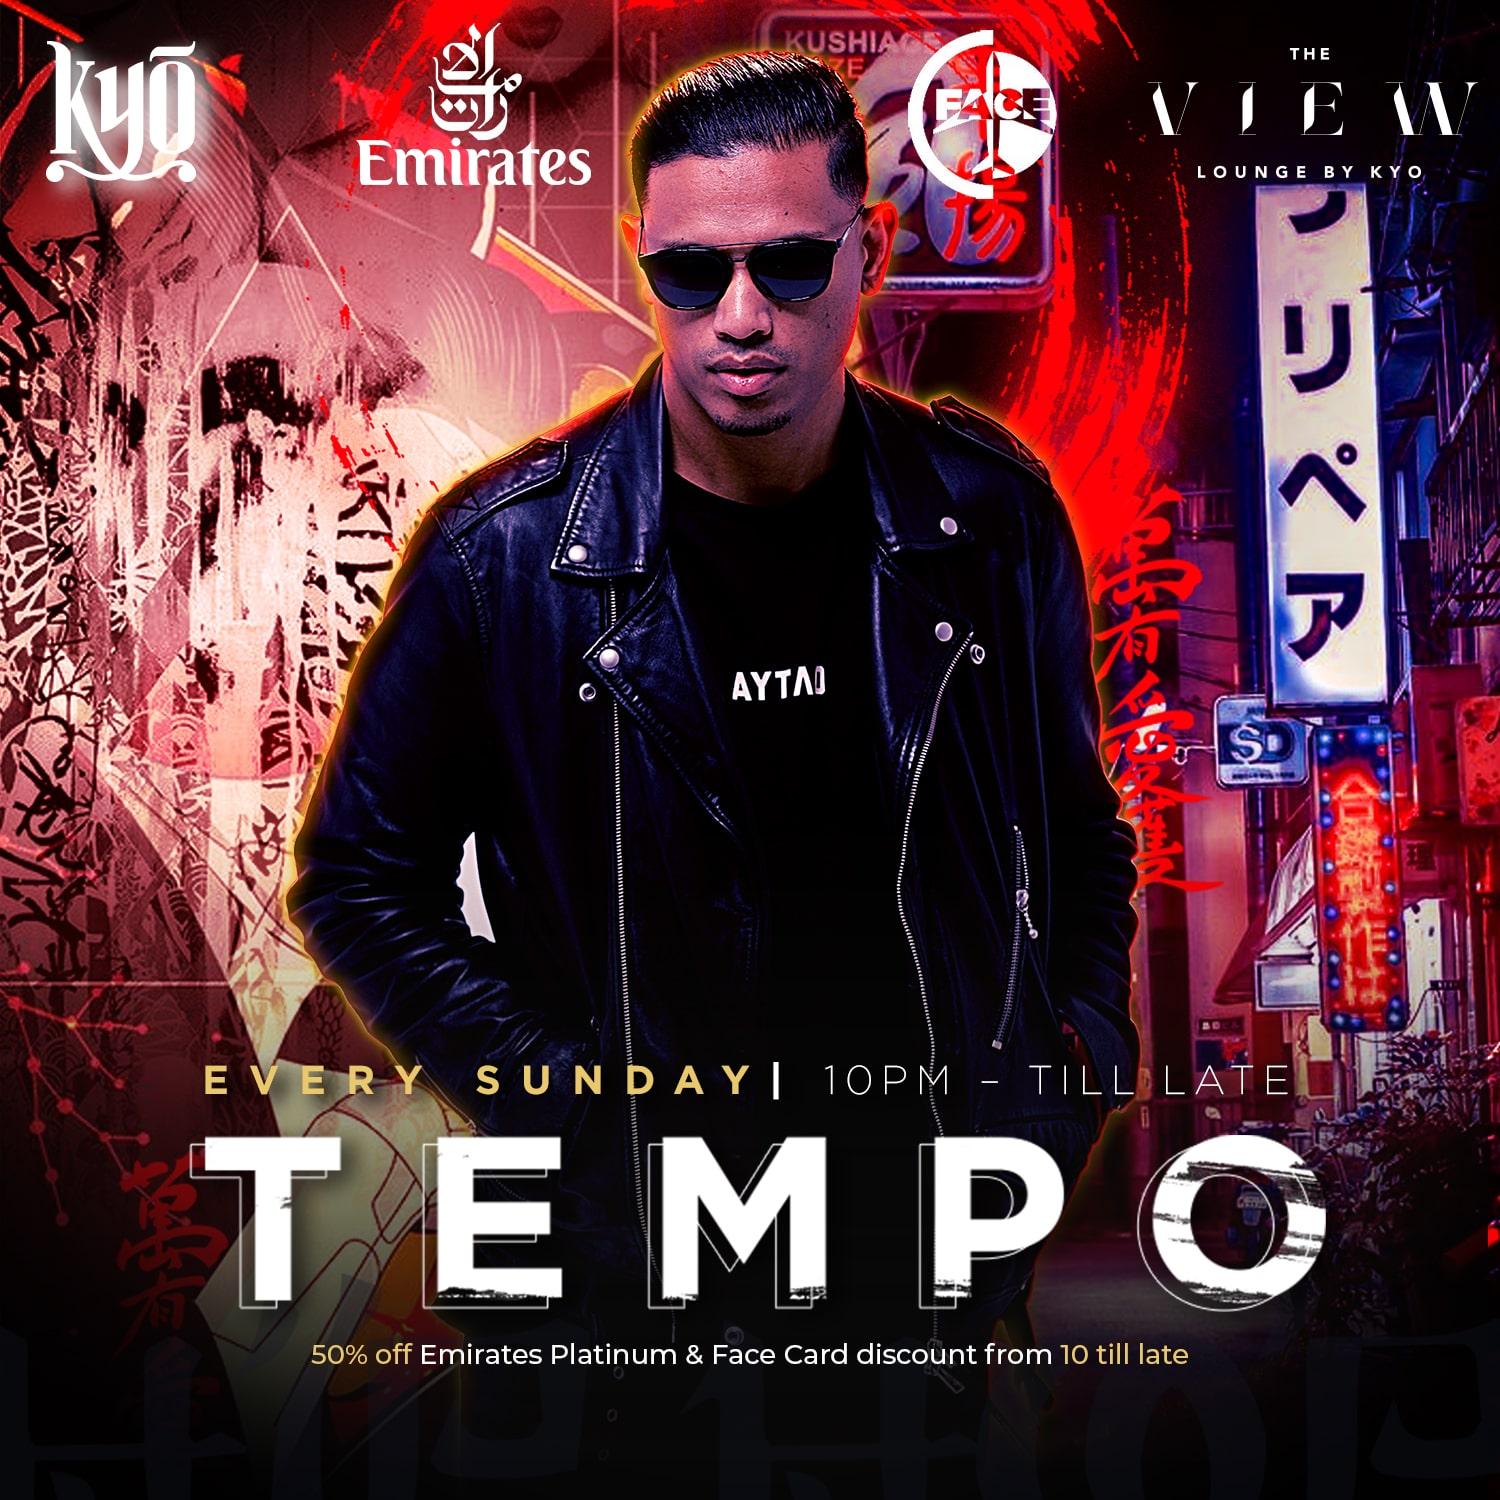 TEMPO at The View Lounge by KYO